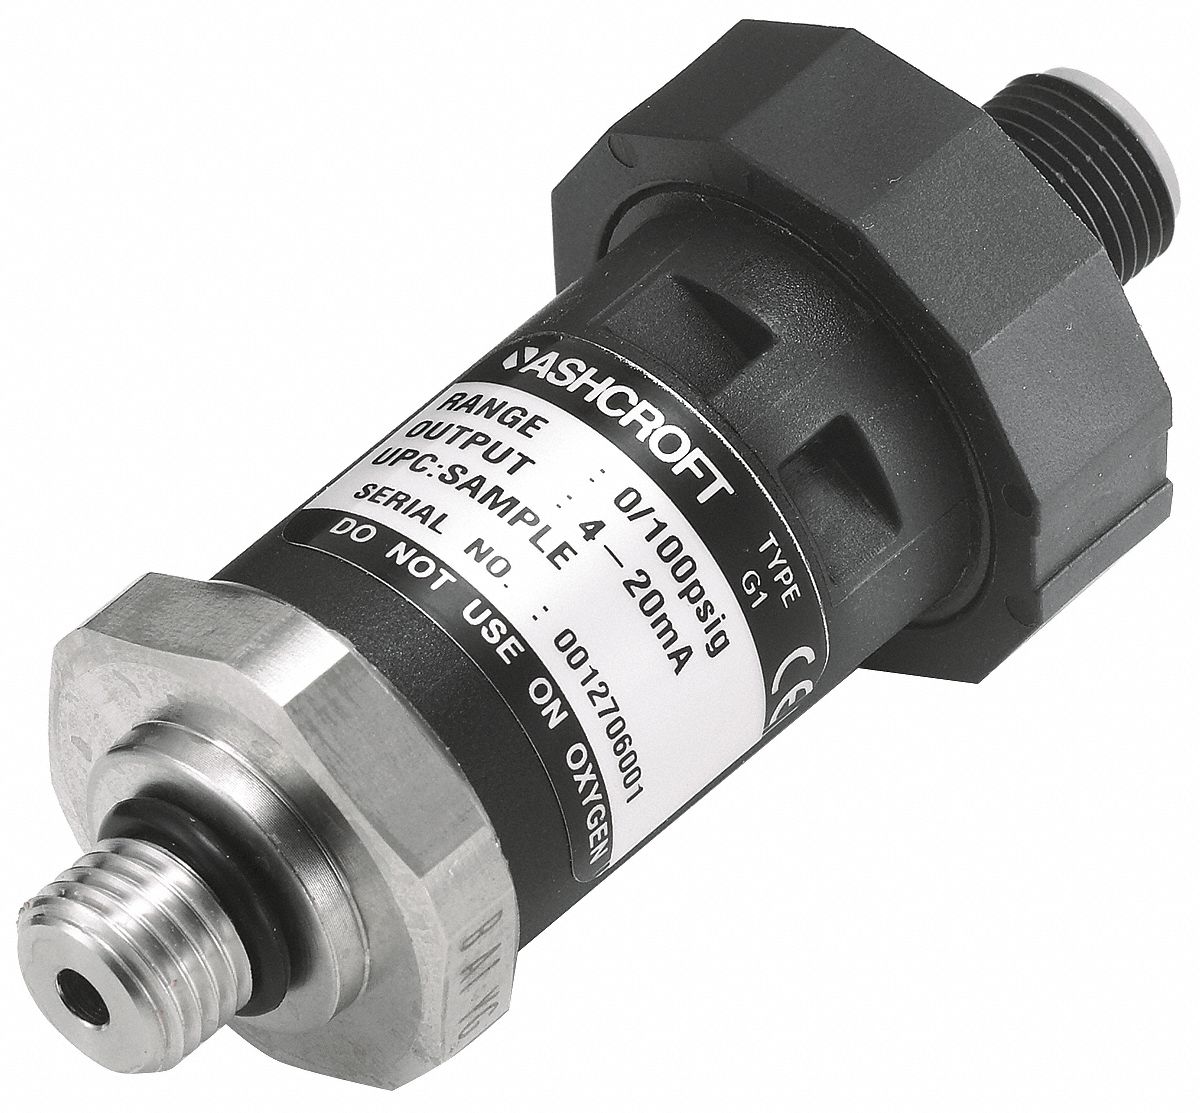 4 to 20mA DC Output G17MEK42F23000# 7/16-20 SAE Male Pressure Transmitter 0 to 3000 psi Ashcroft 